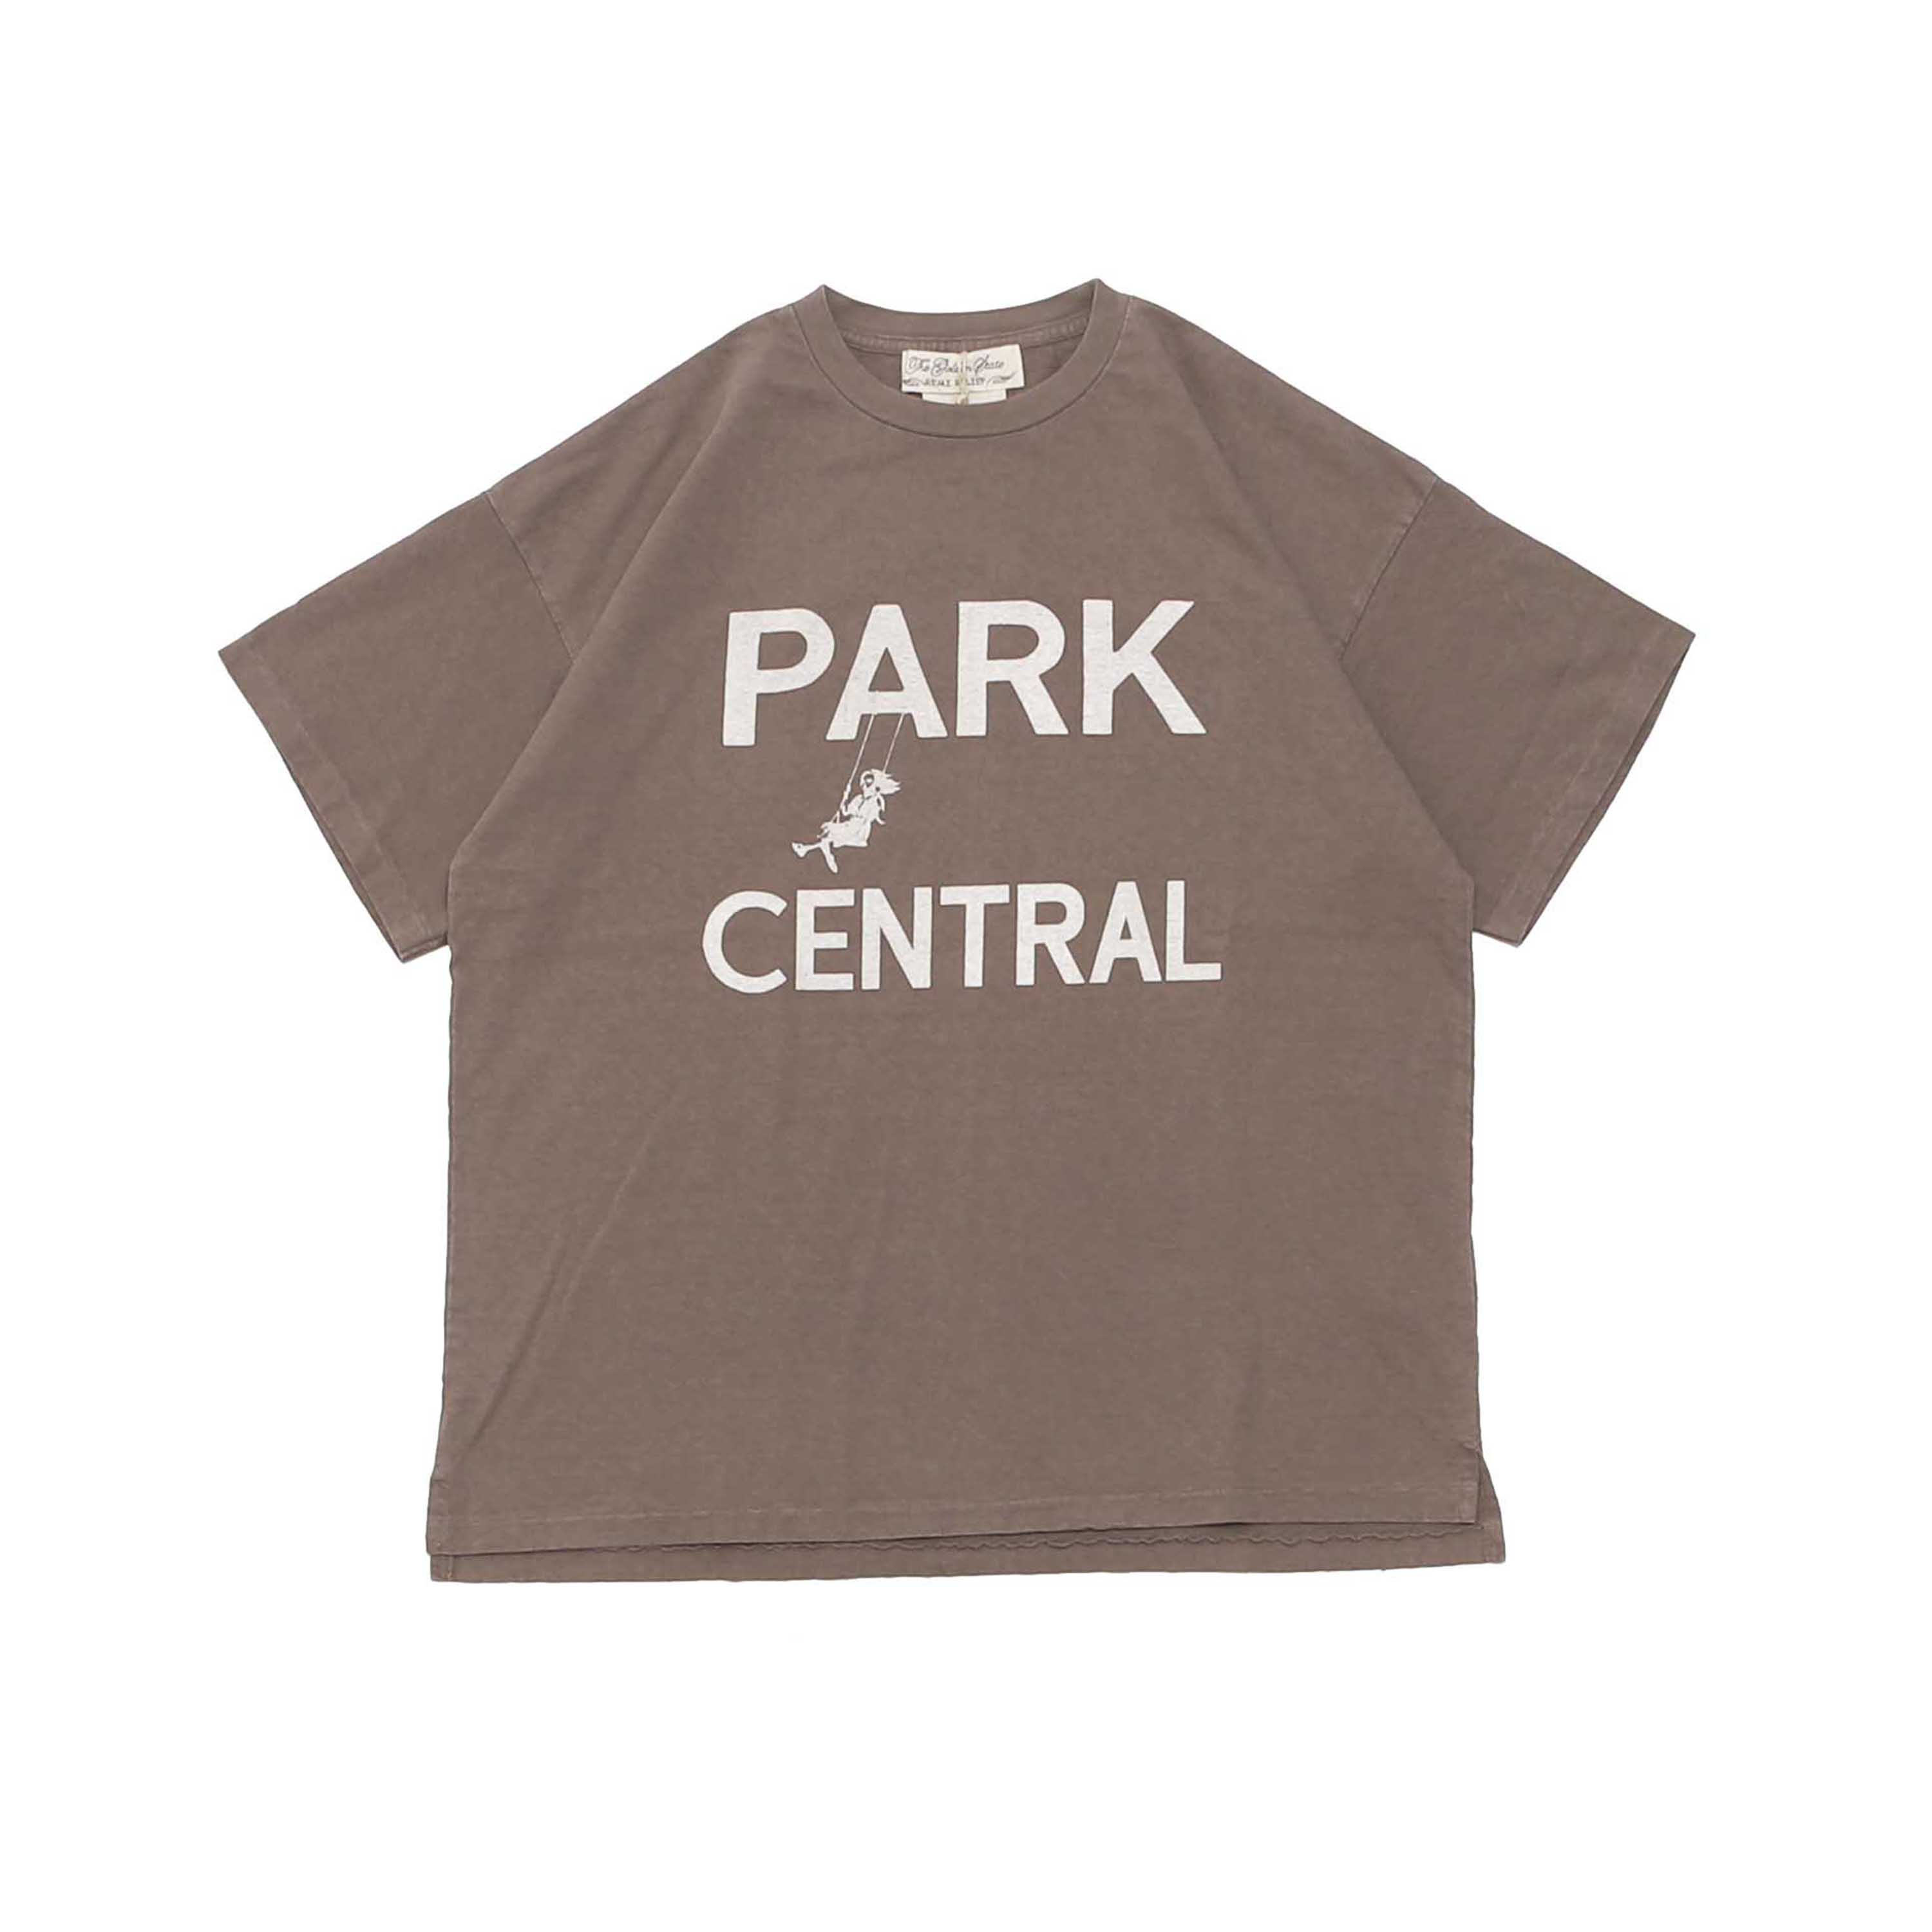 16 JERSEY S/S TEE - PARK CENTRAL BROWN